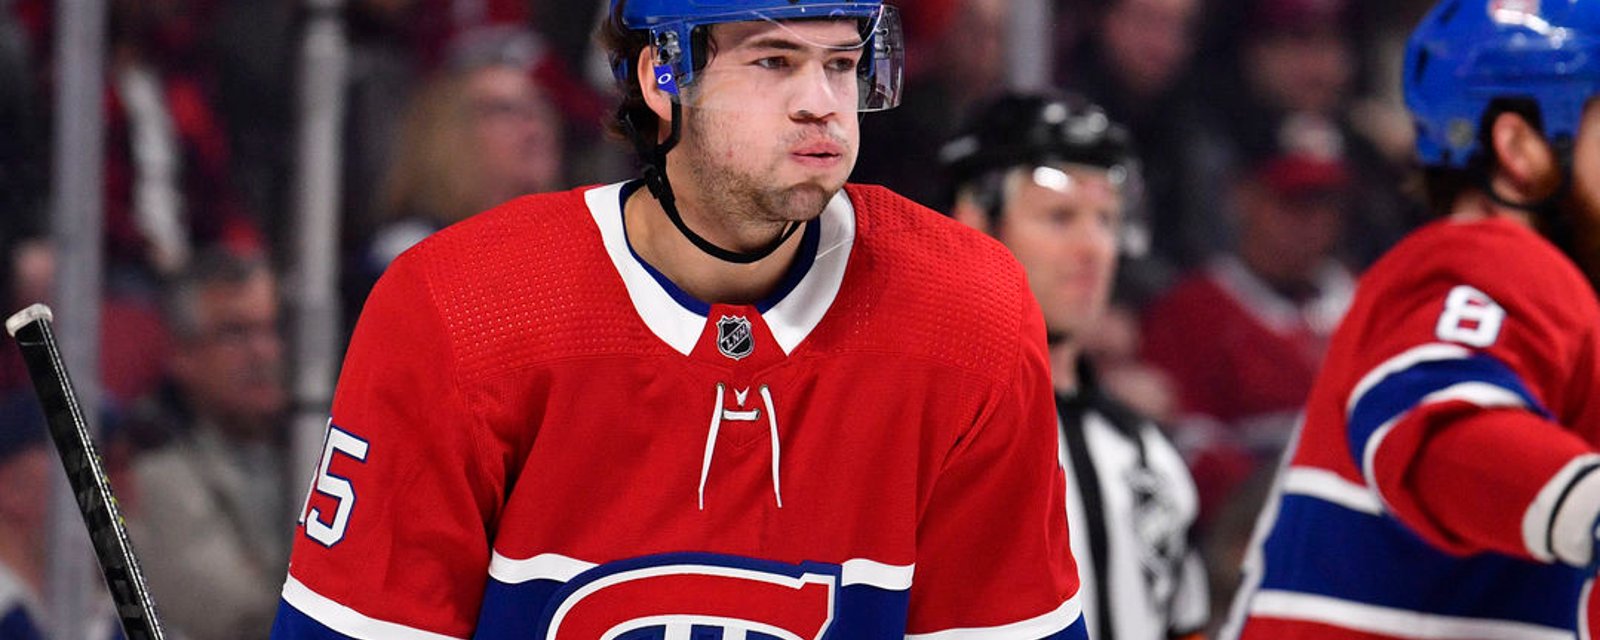 Habs lose three players to injury, including star prospect Poehling